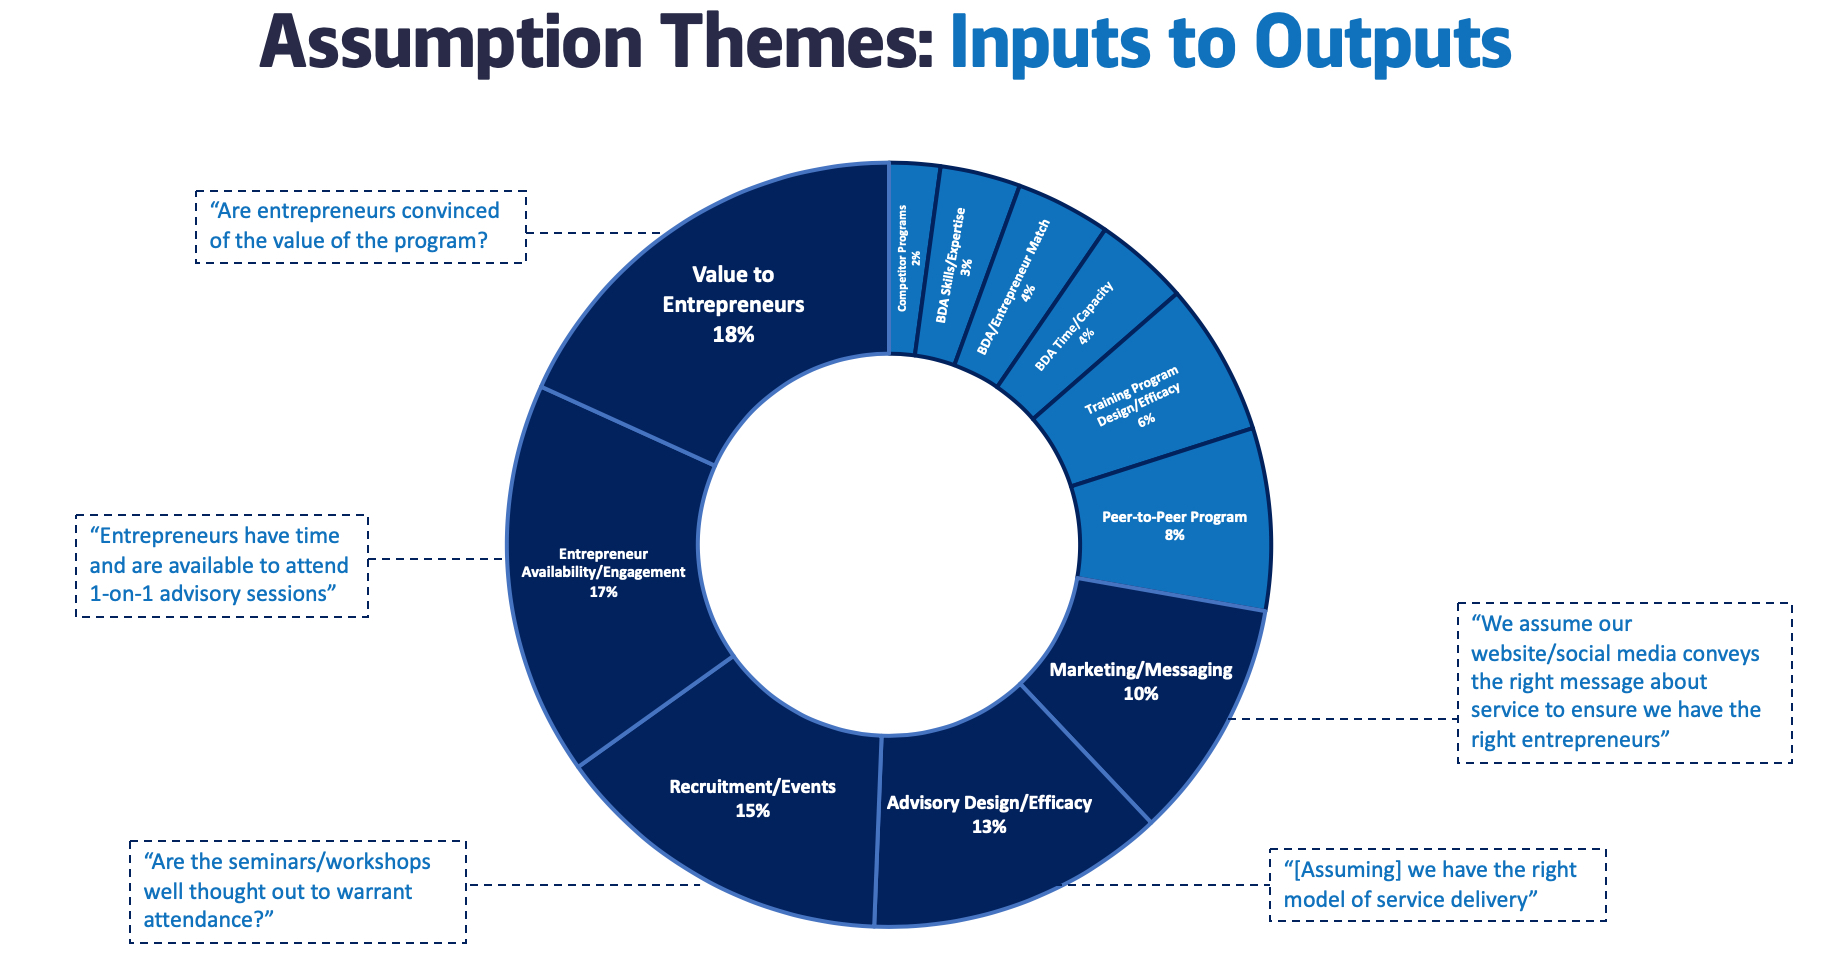 A distilled look at the staff-generated assumptions from the Workshop, organized into key themes for tracking Ongoza’s core inputs/activities to their desired programmatic outputs.